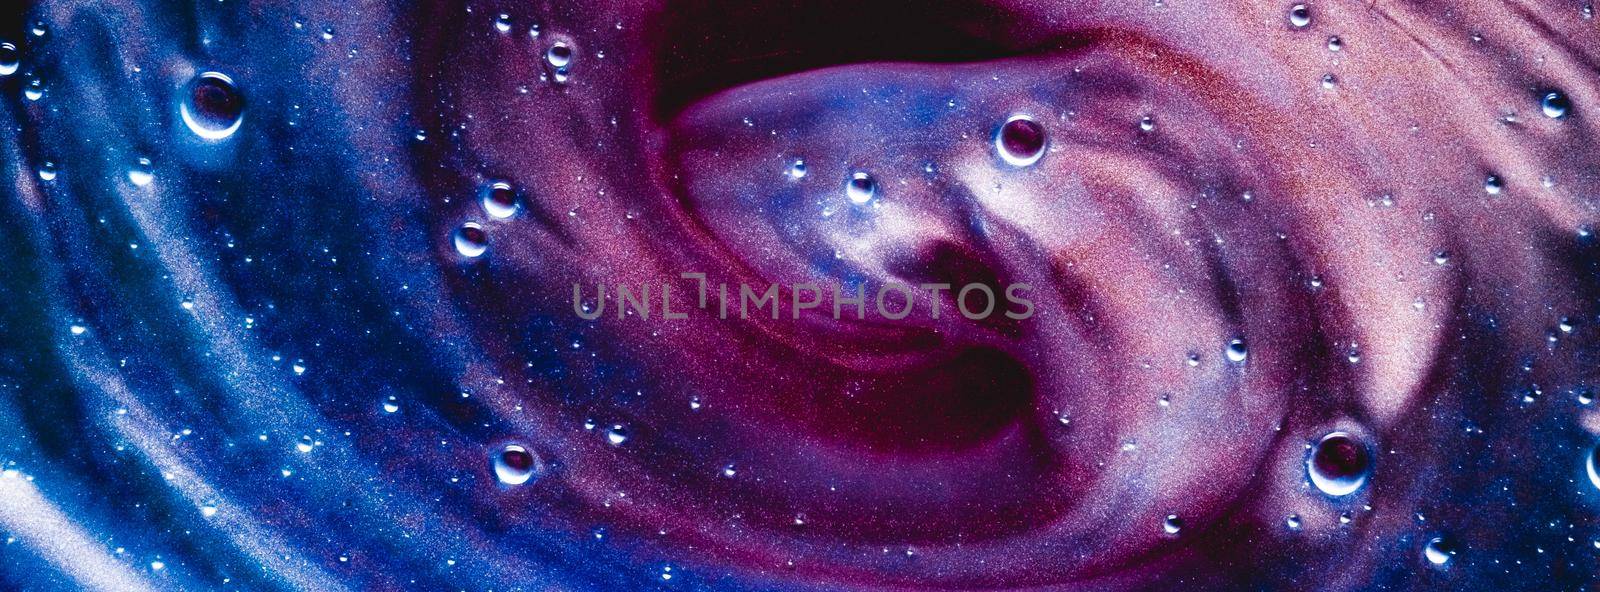 Abstract liquid banner background, paint splash, swirl pattern and water drops, beauty gel and cosmetic texture, contemporary magic art and science as luxury flatlay design.